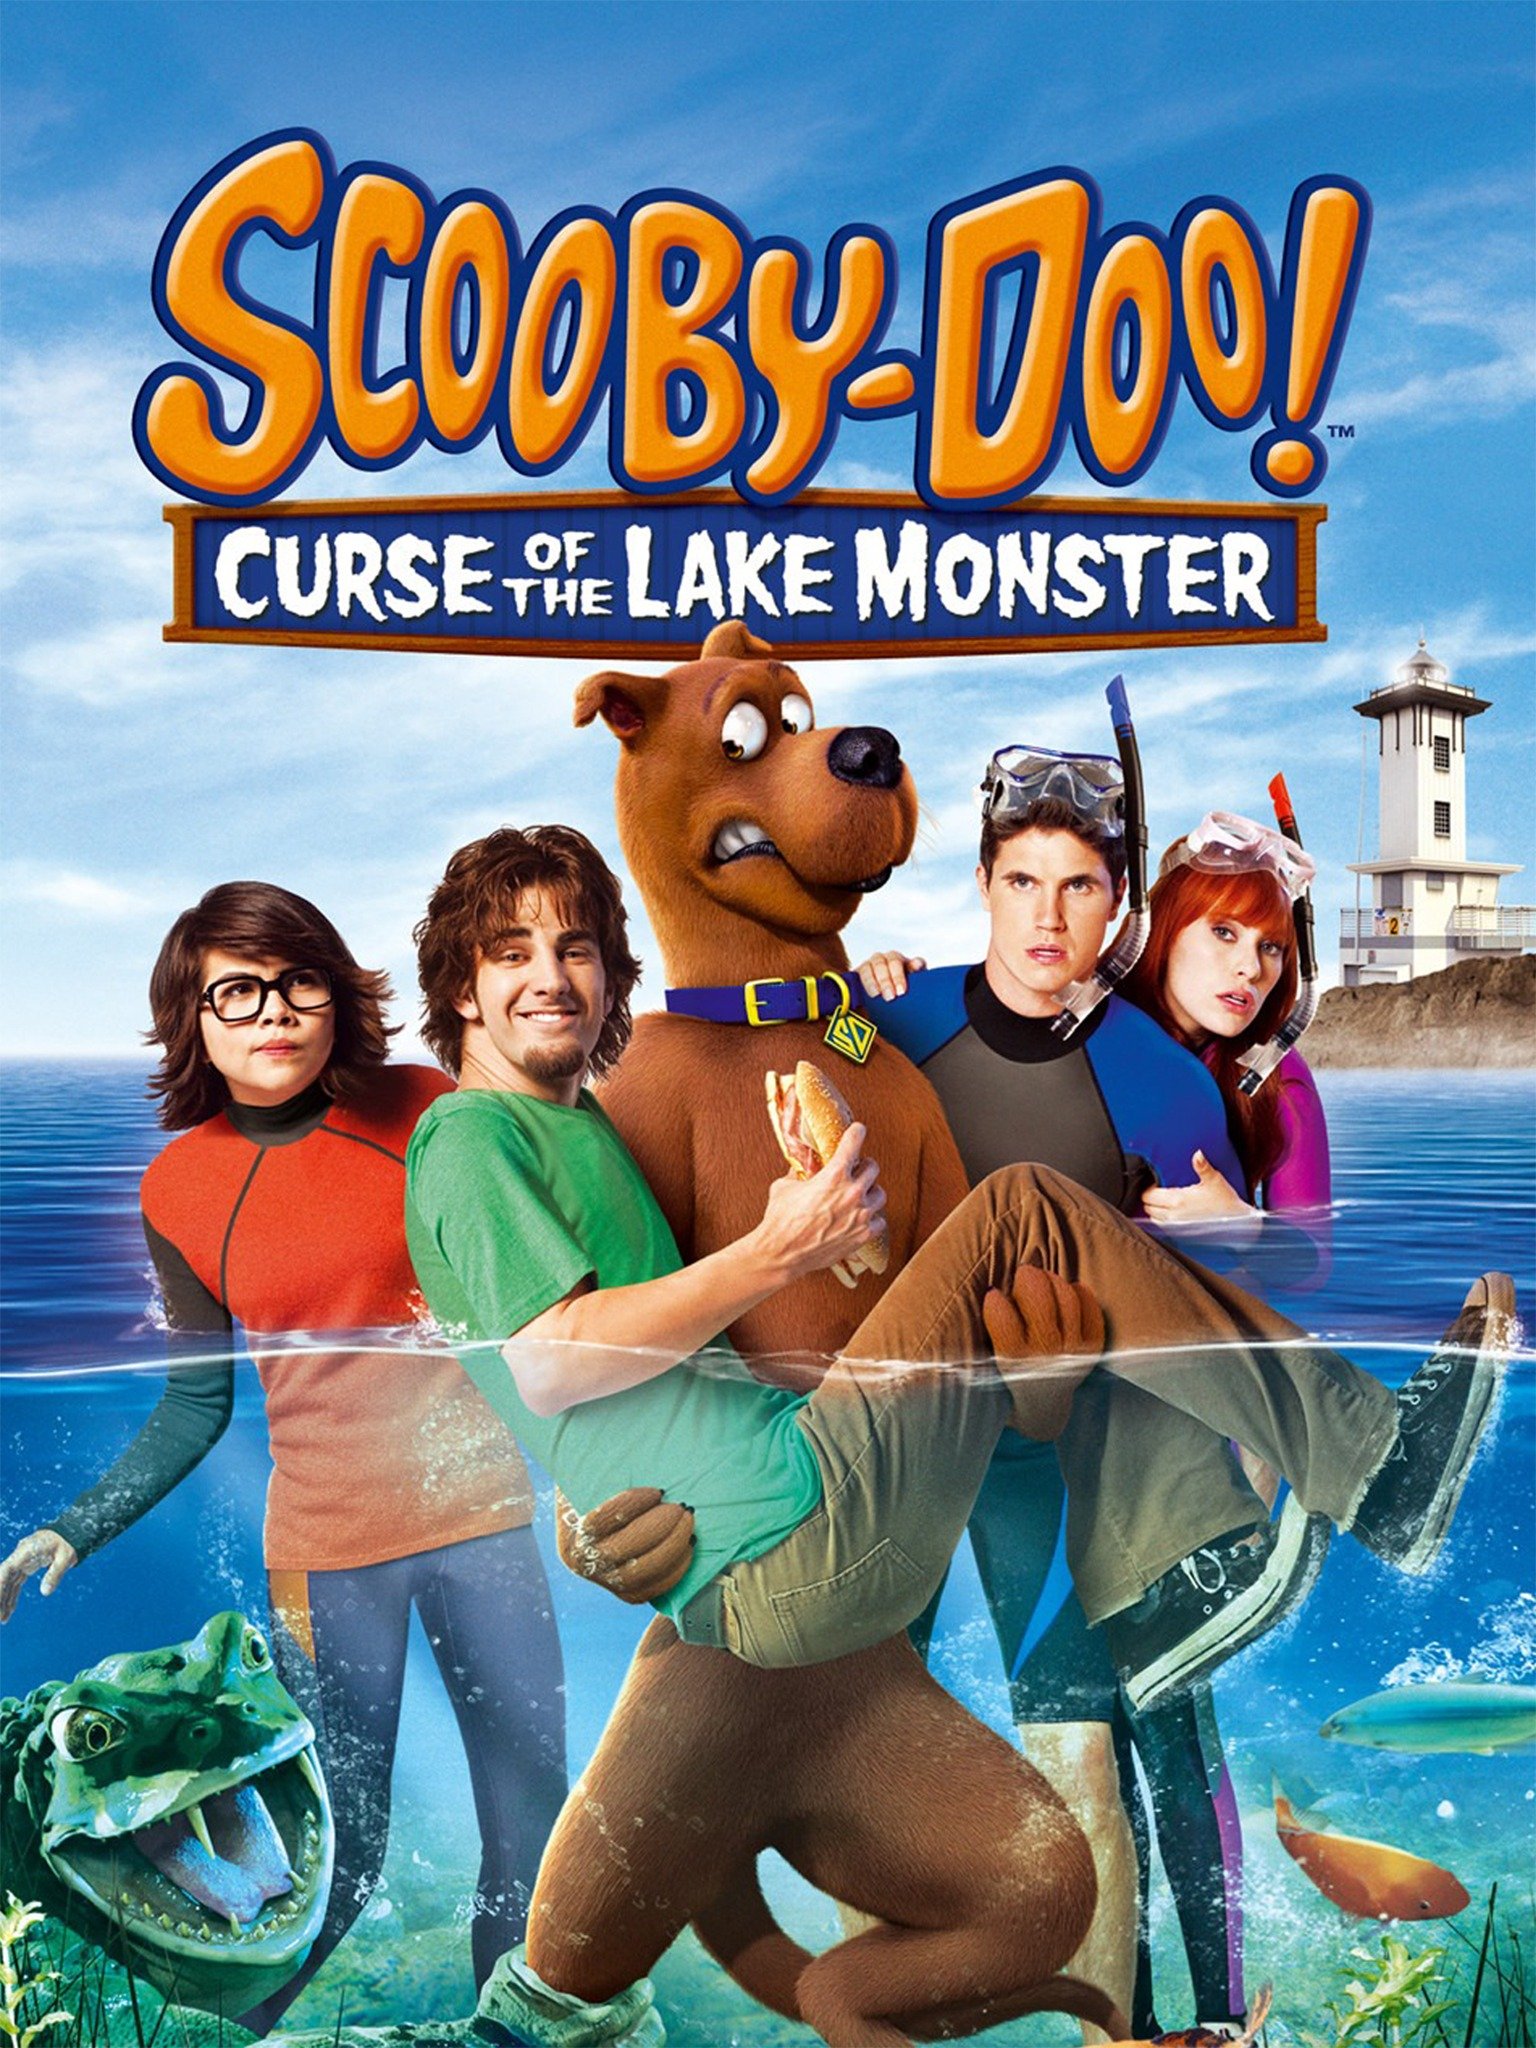 fred scooby doo movie actor